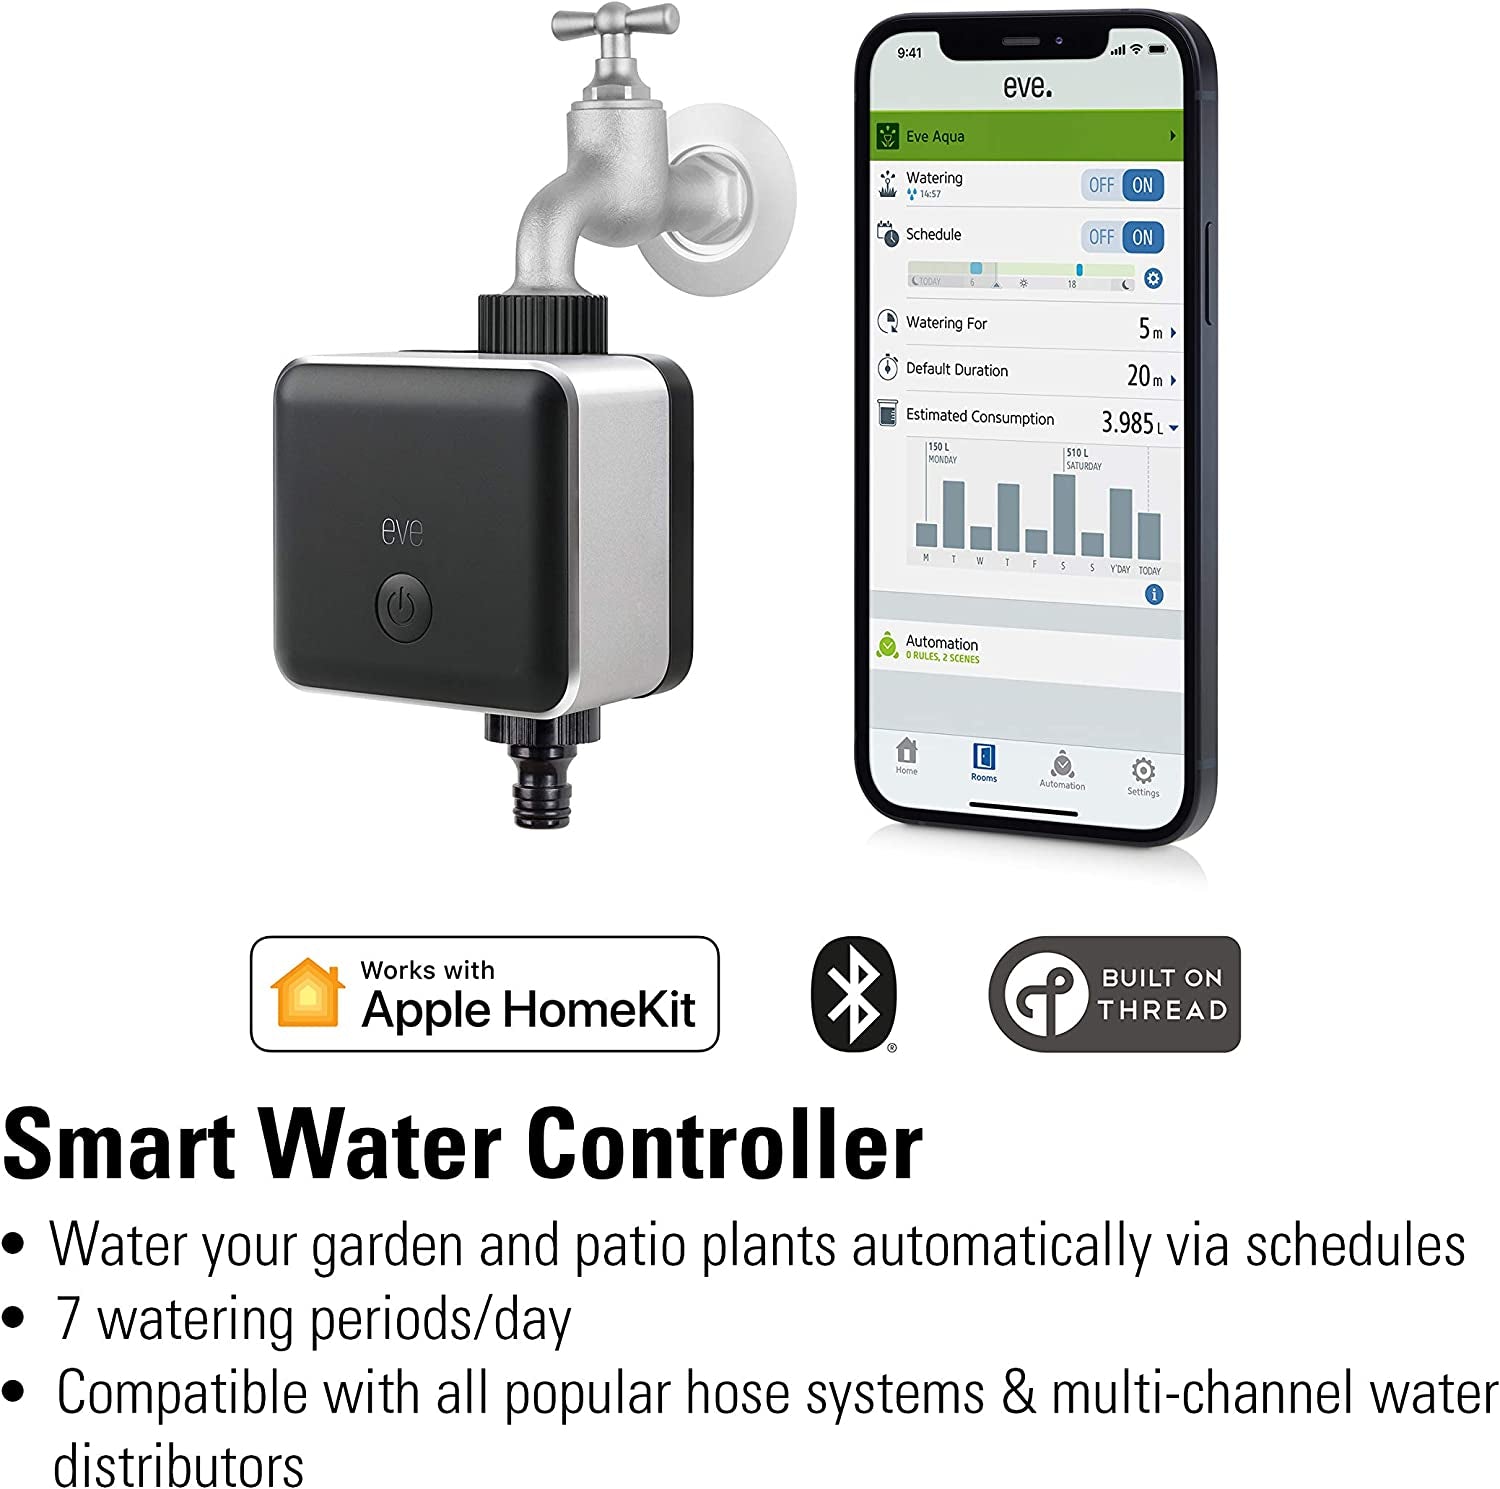 Eve, Eve Aqua – Smart Water Controller for Apple Home App or Siri, Irrigate Automatically with Schedules, Easy to Use, Remote Access, No Bridge, Bluetooth, Thread, Homekit